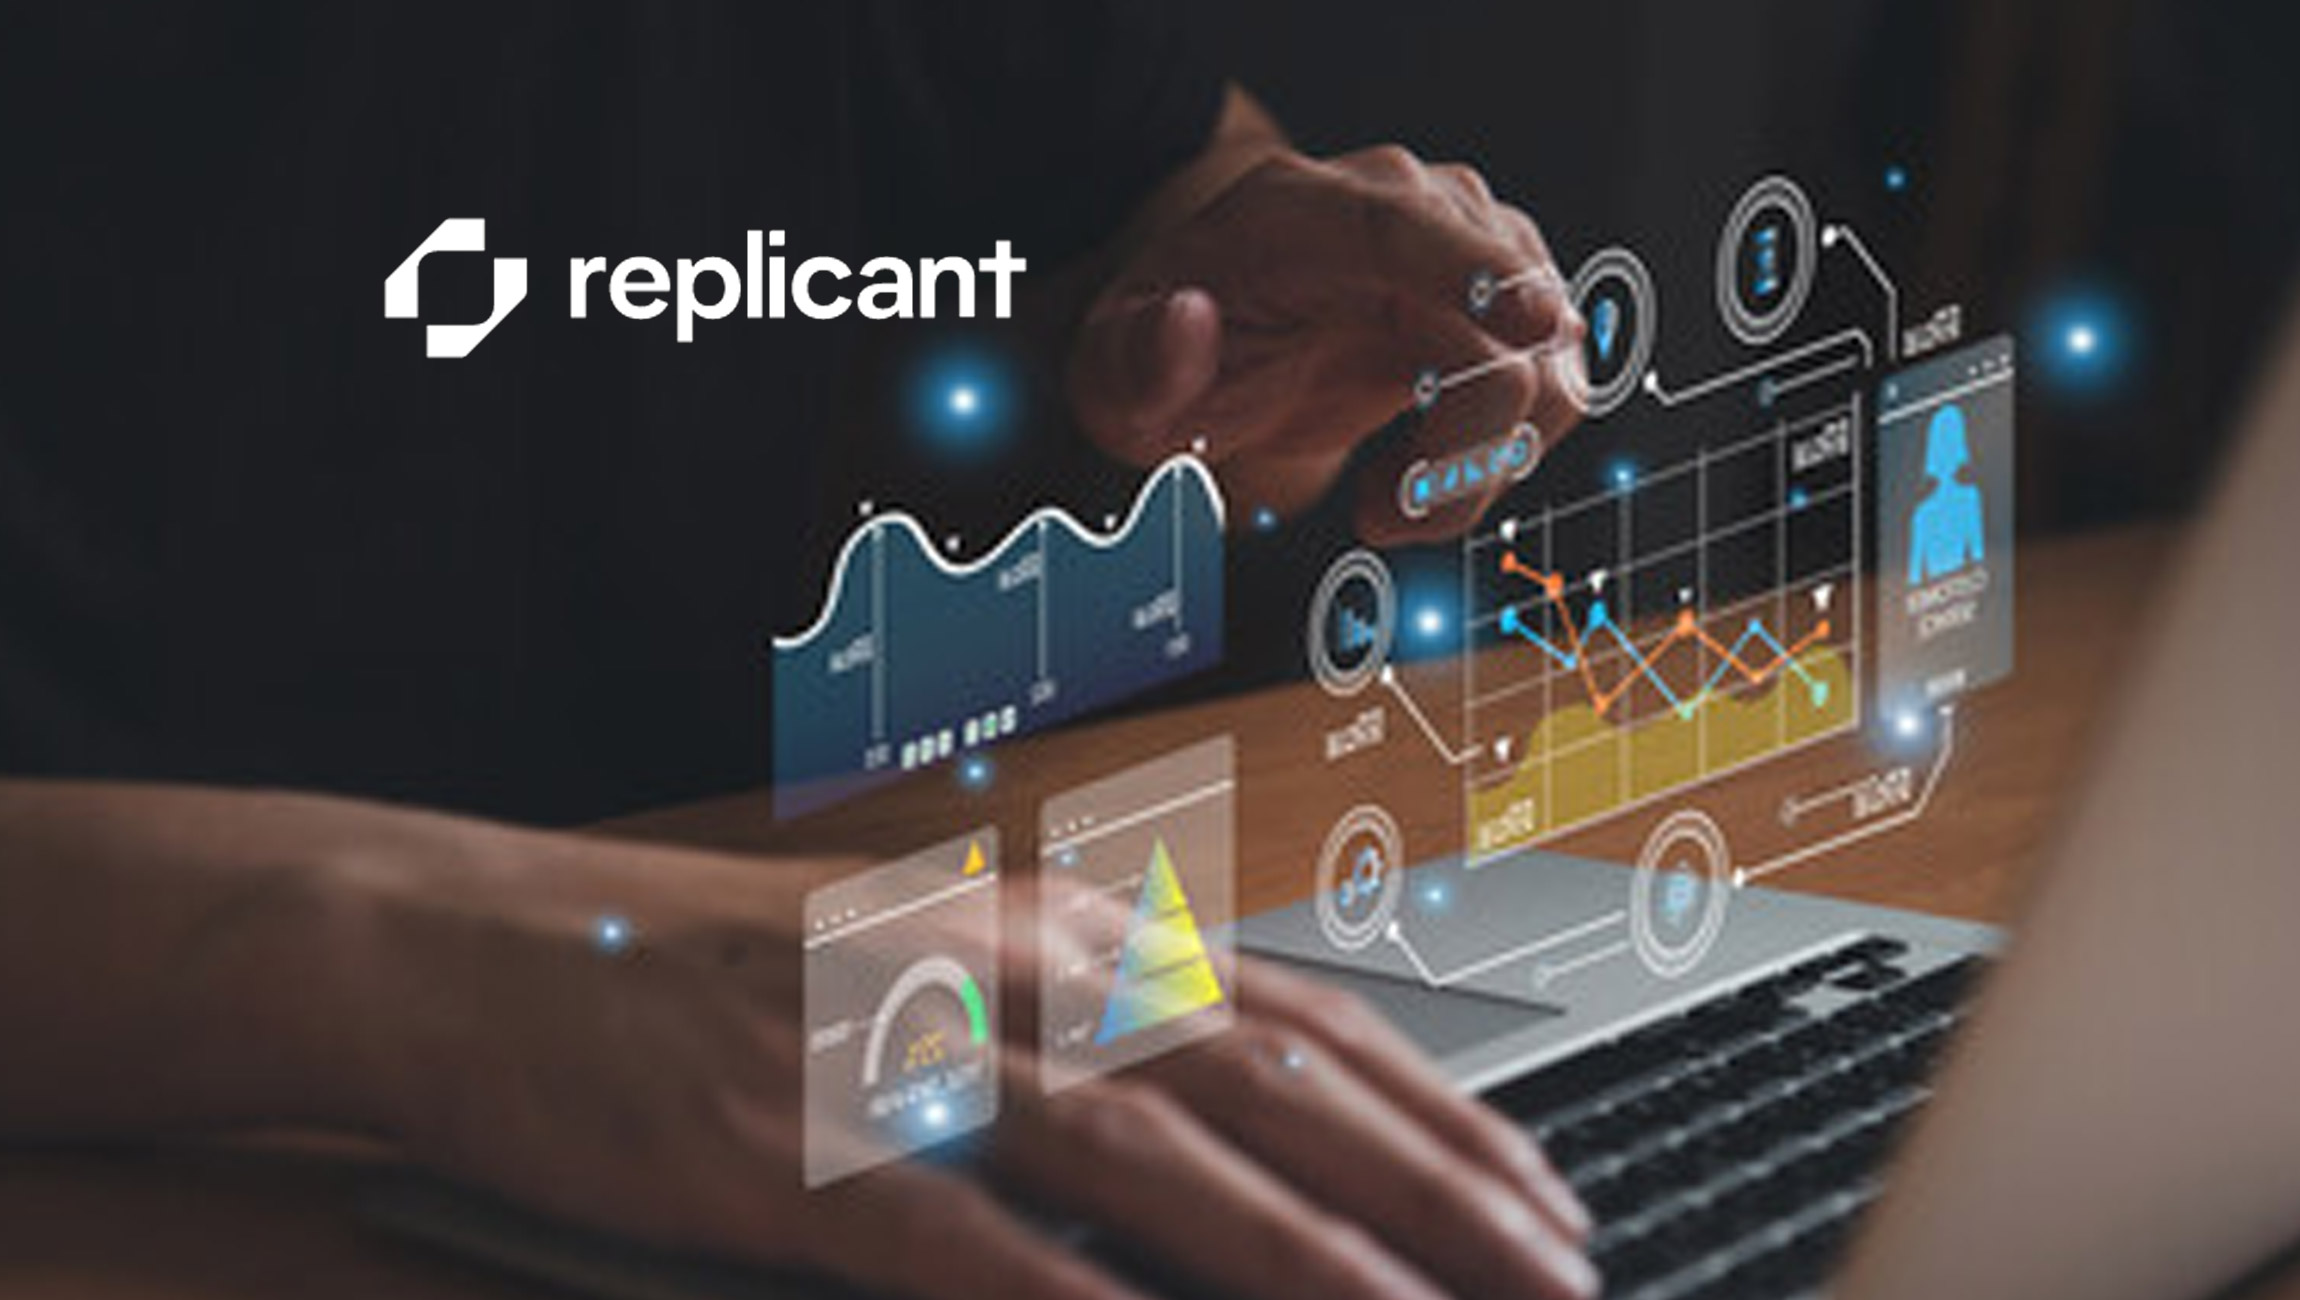 New Contact Center Benchmark Report From Replicant and Demand Metric Reveals Automation as Top Priority in 2023